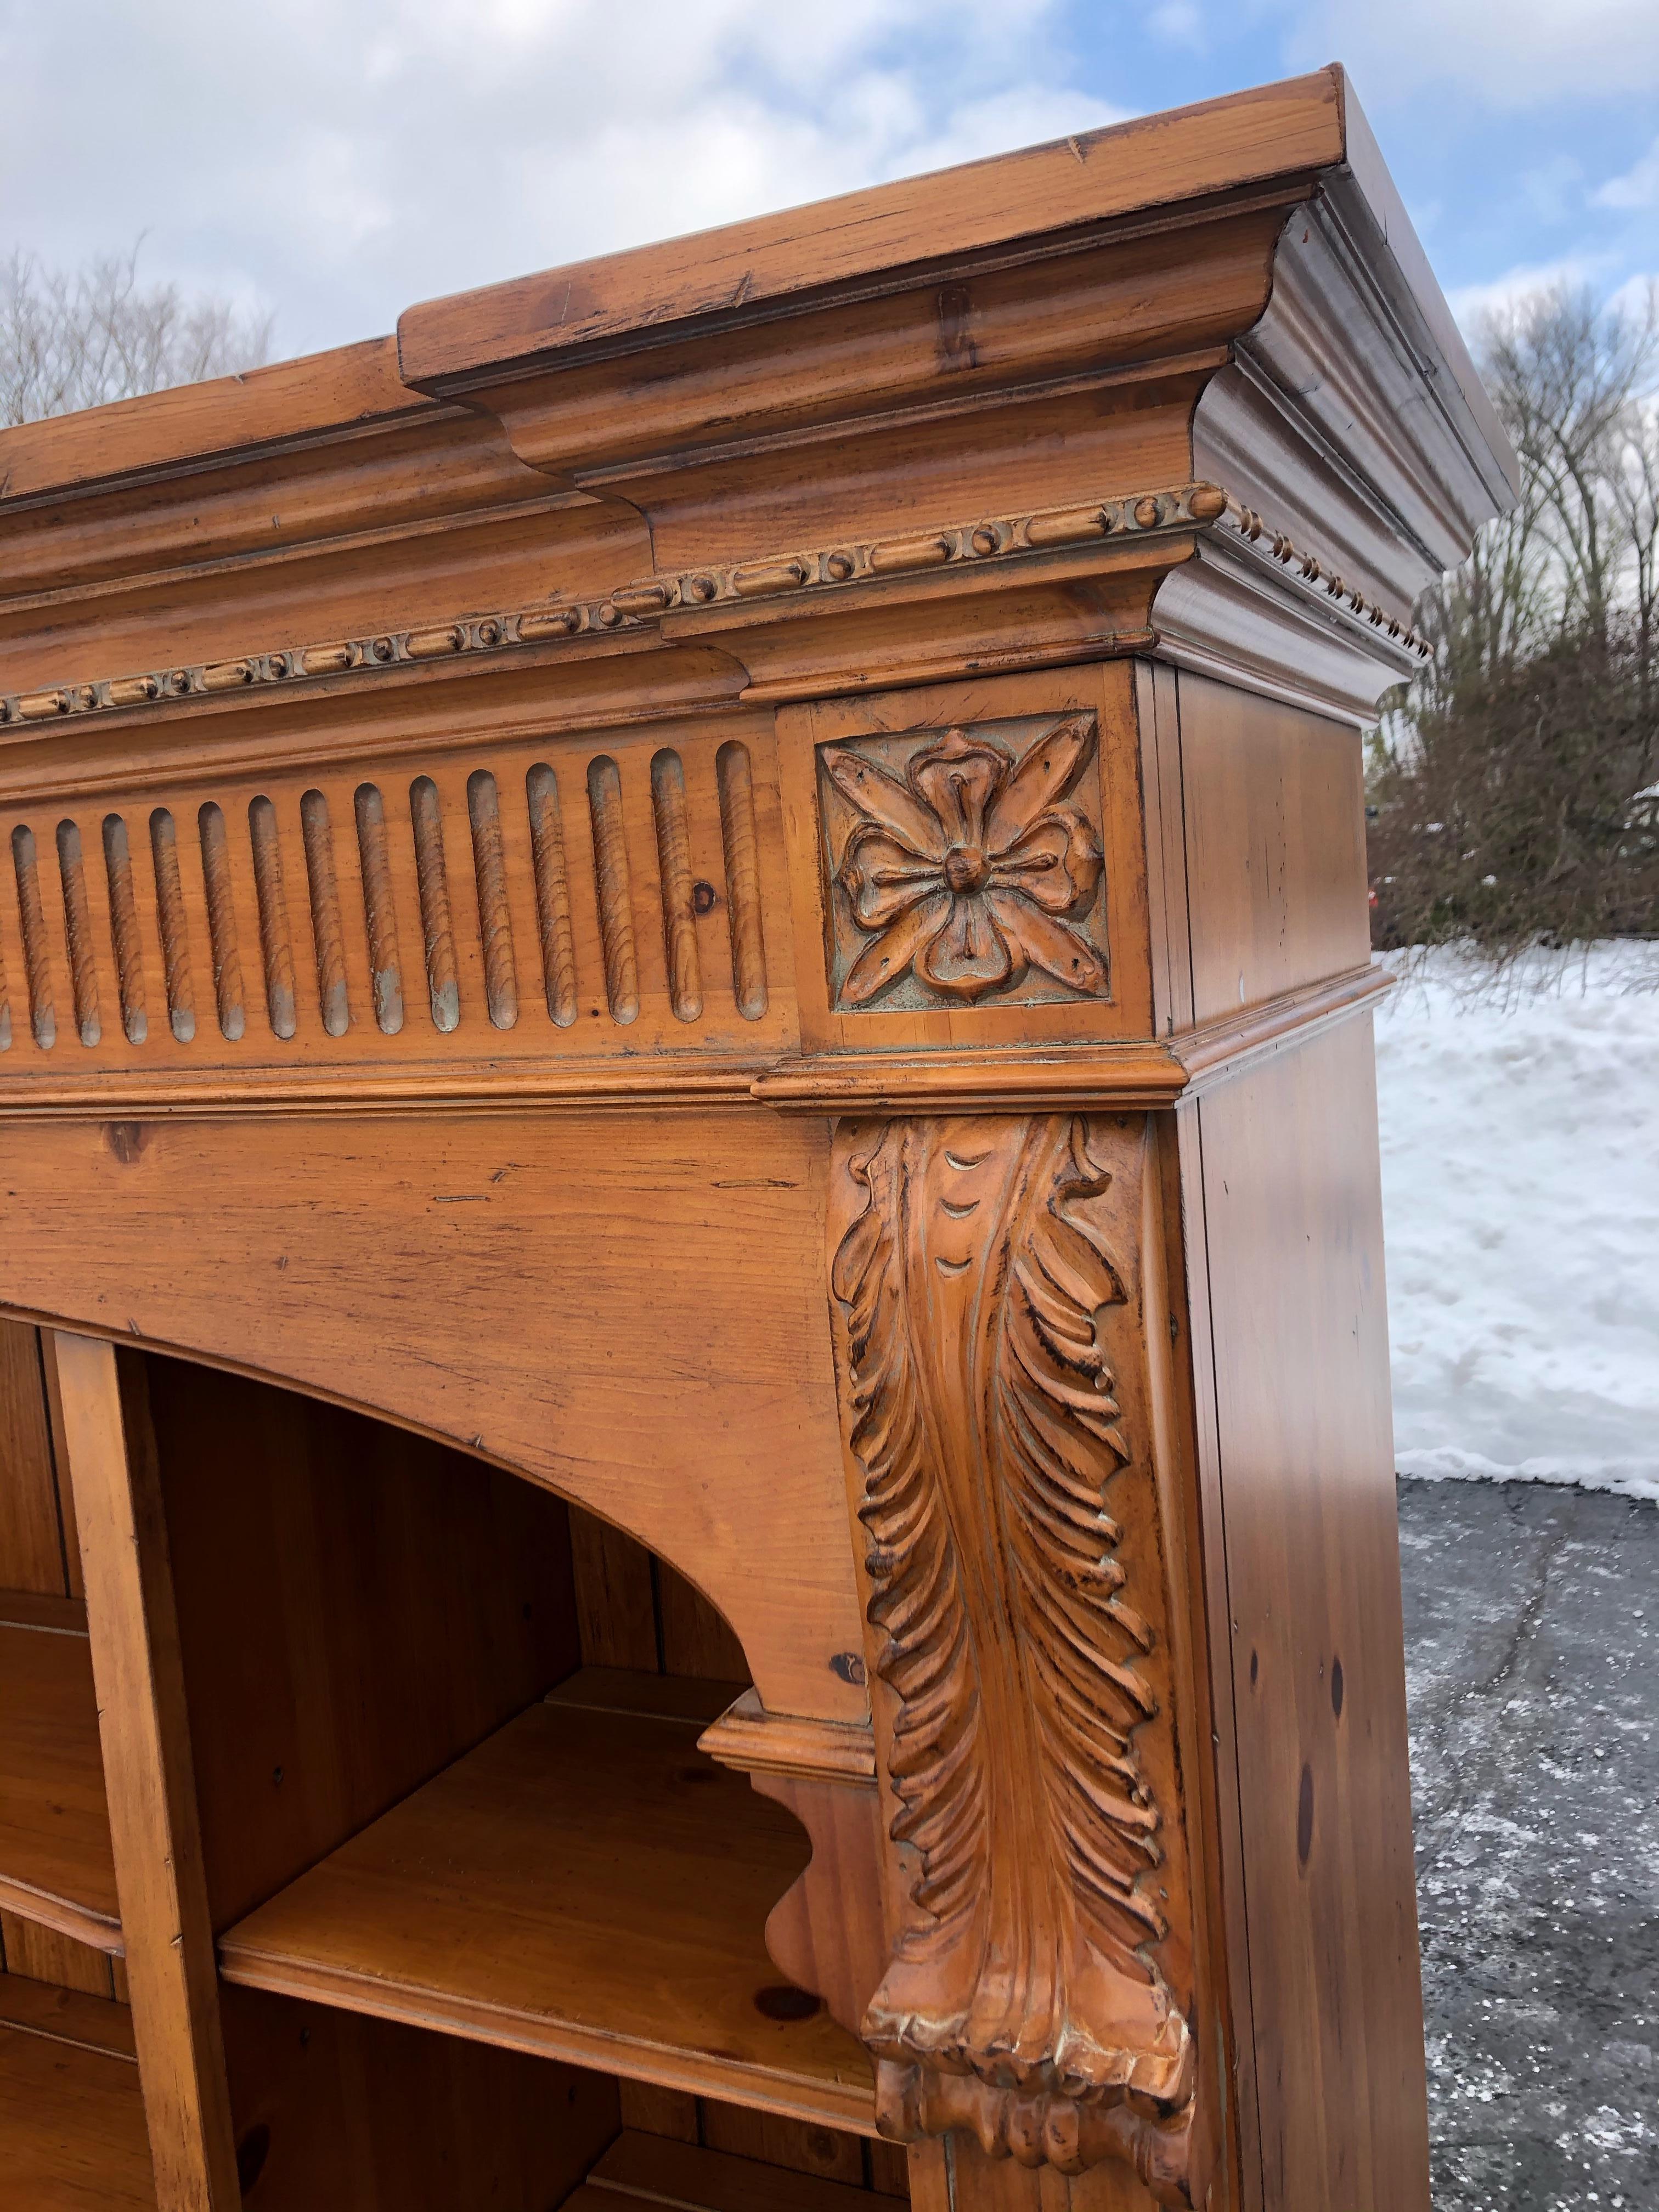 Majestic Ethan Allen library bookcase from their Legacy collection. Pine wood with screwed in shelving. Top hutch piece separates from the base.
Measures: Top hutch piece
60 H x 77 W x 18 D
Bottom
31 H x 74 W x 18 D.